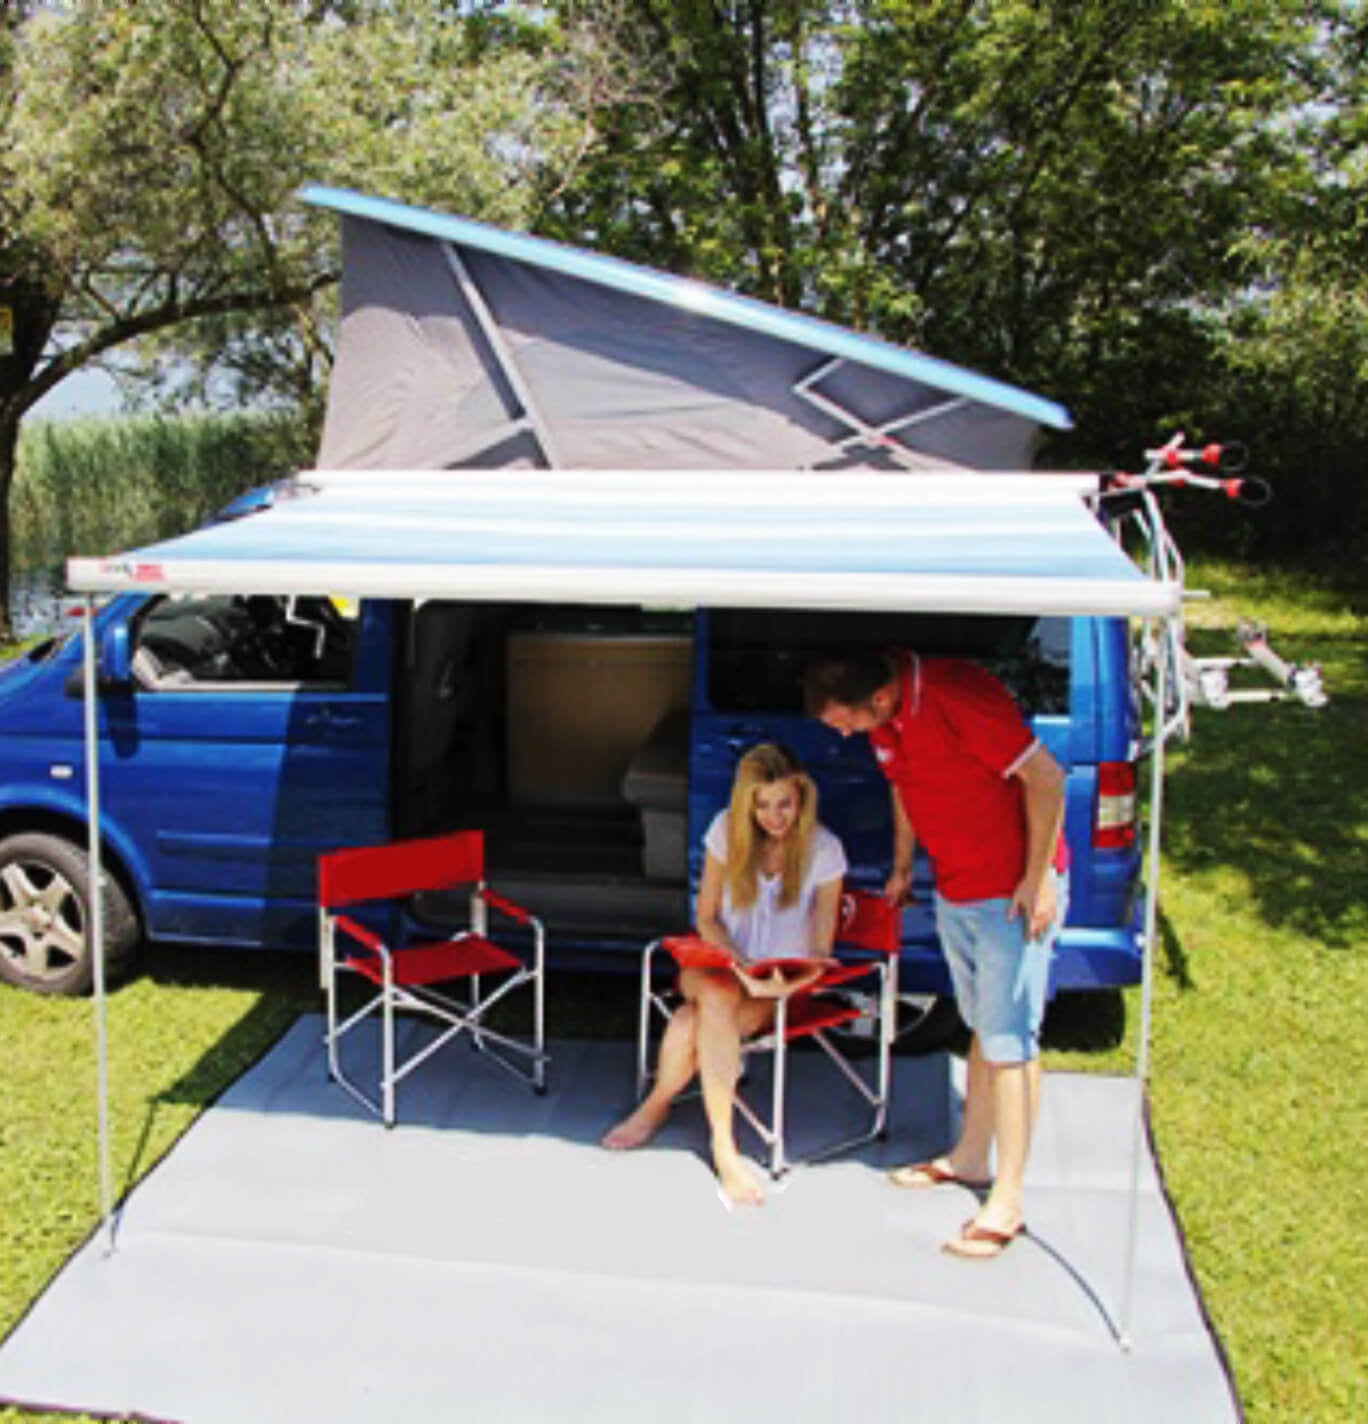 Fiamma F45s attached to the VW with people reading and relaxing